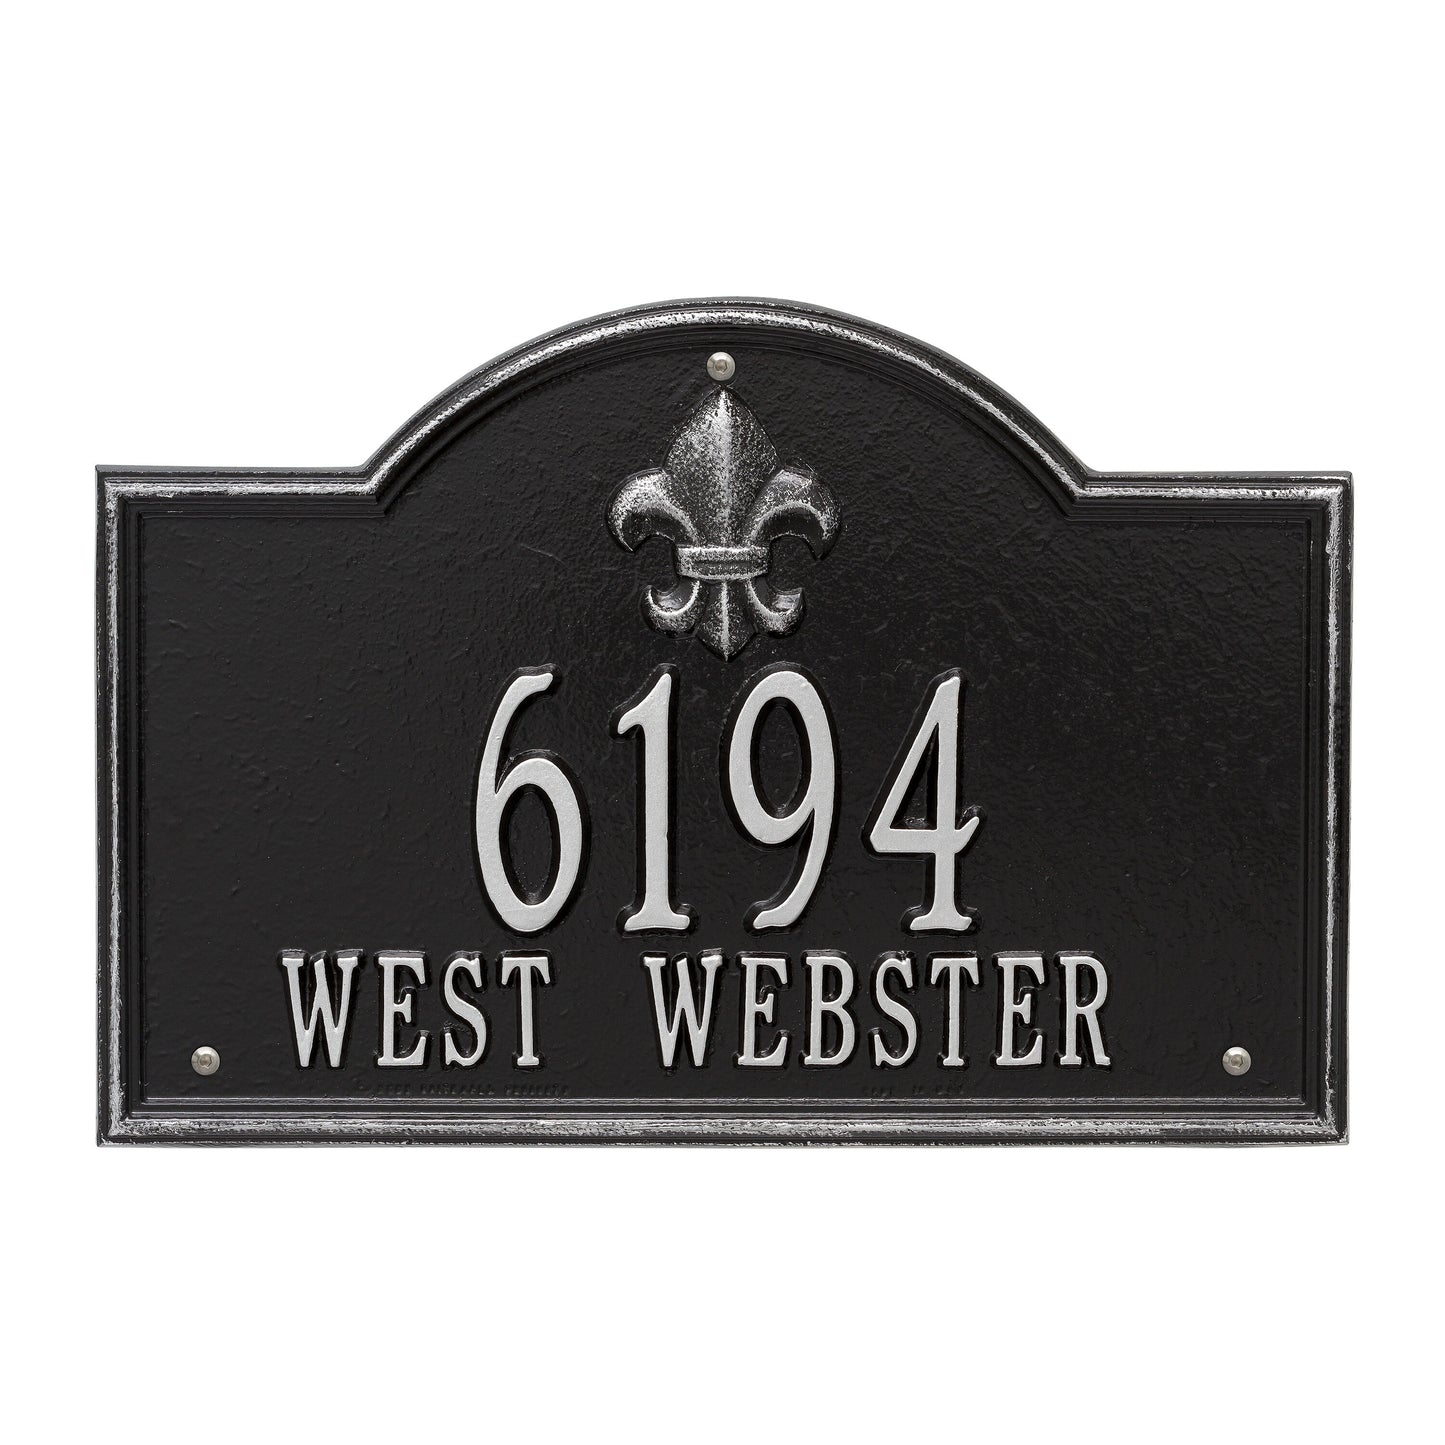 Whitehall Products Bayou Vista Standard Wall Plaque Two Line Black/silver